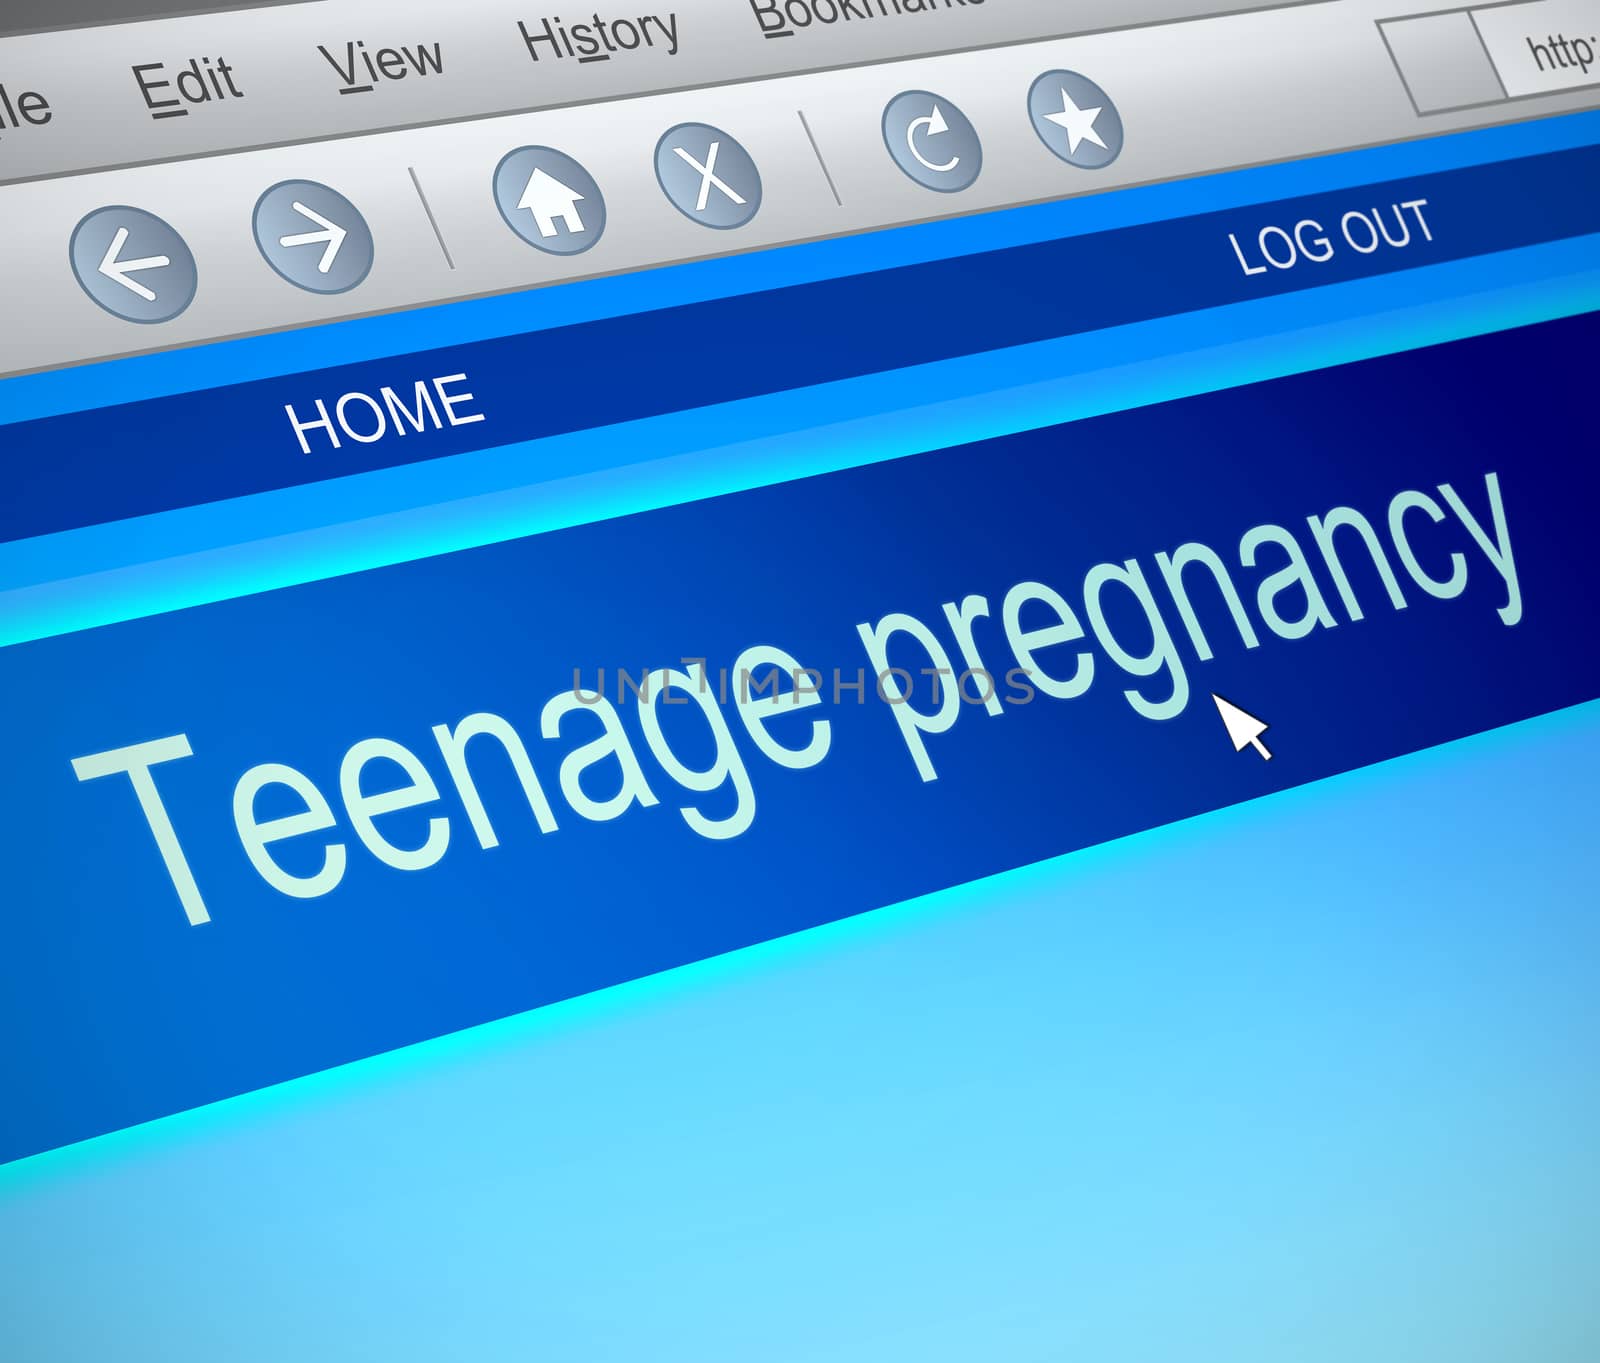 Illustration depicting a computer screen capture with a teenage pregnancy concept.